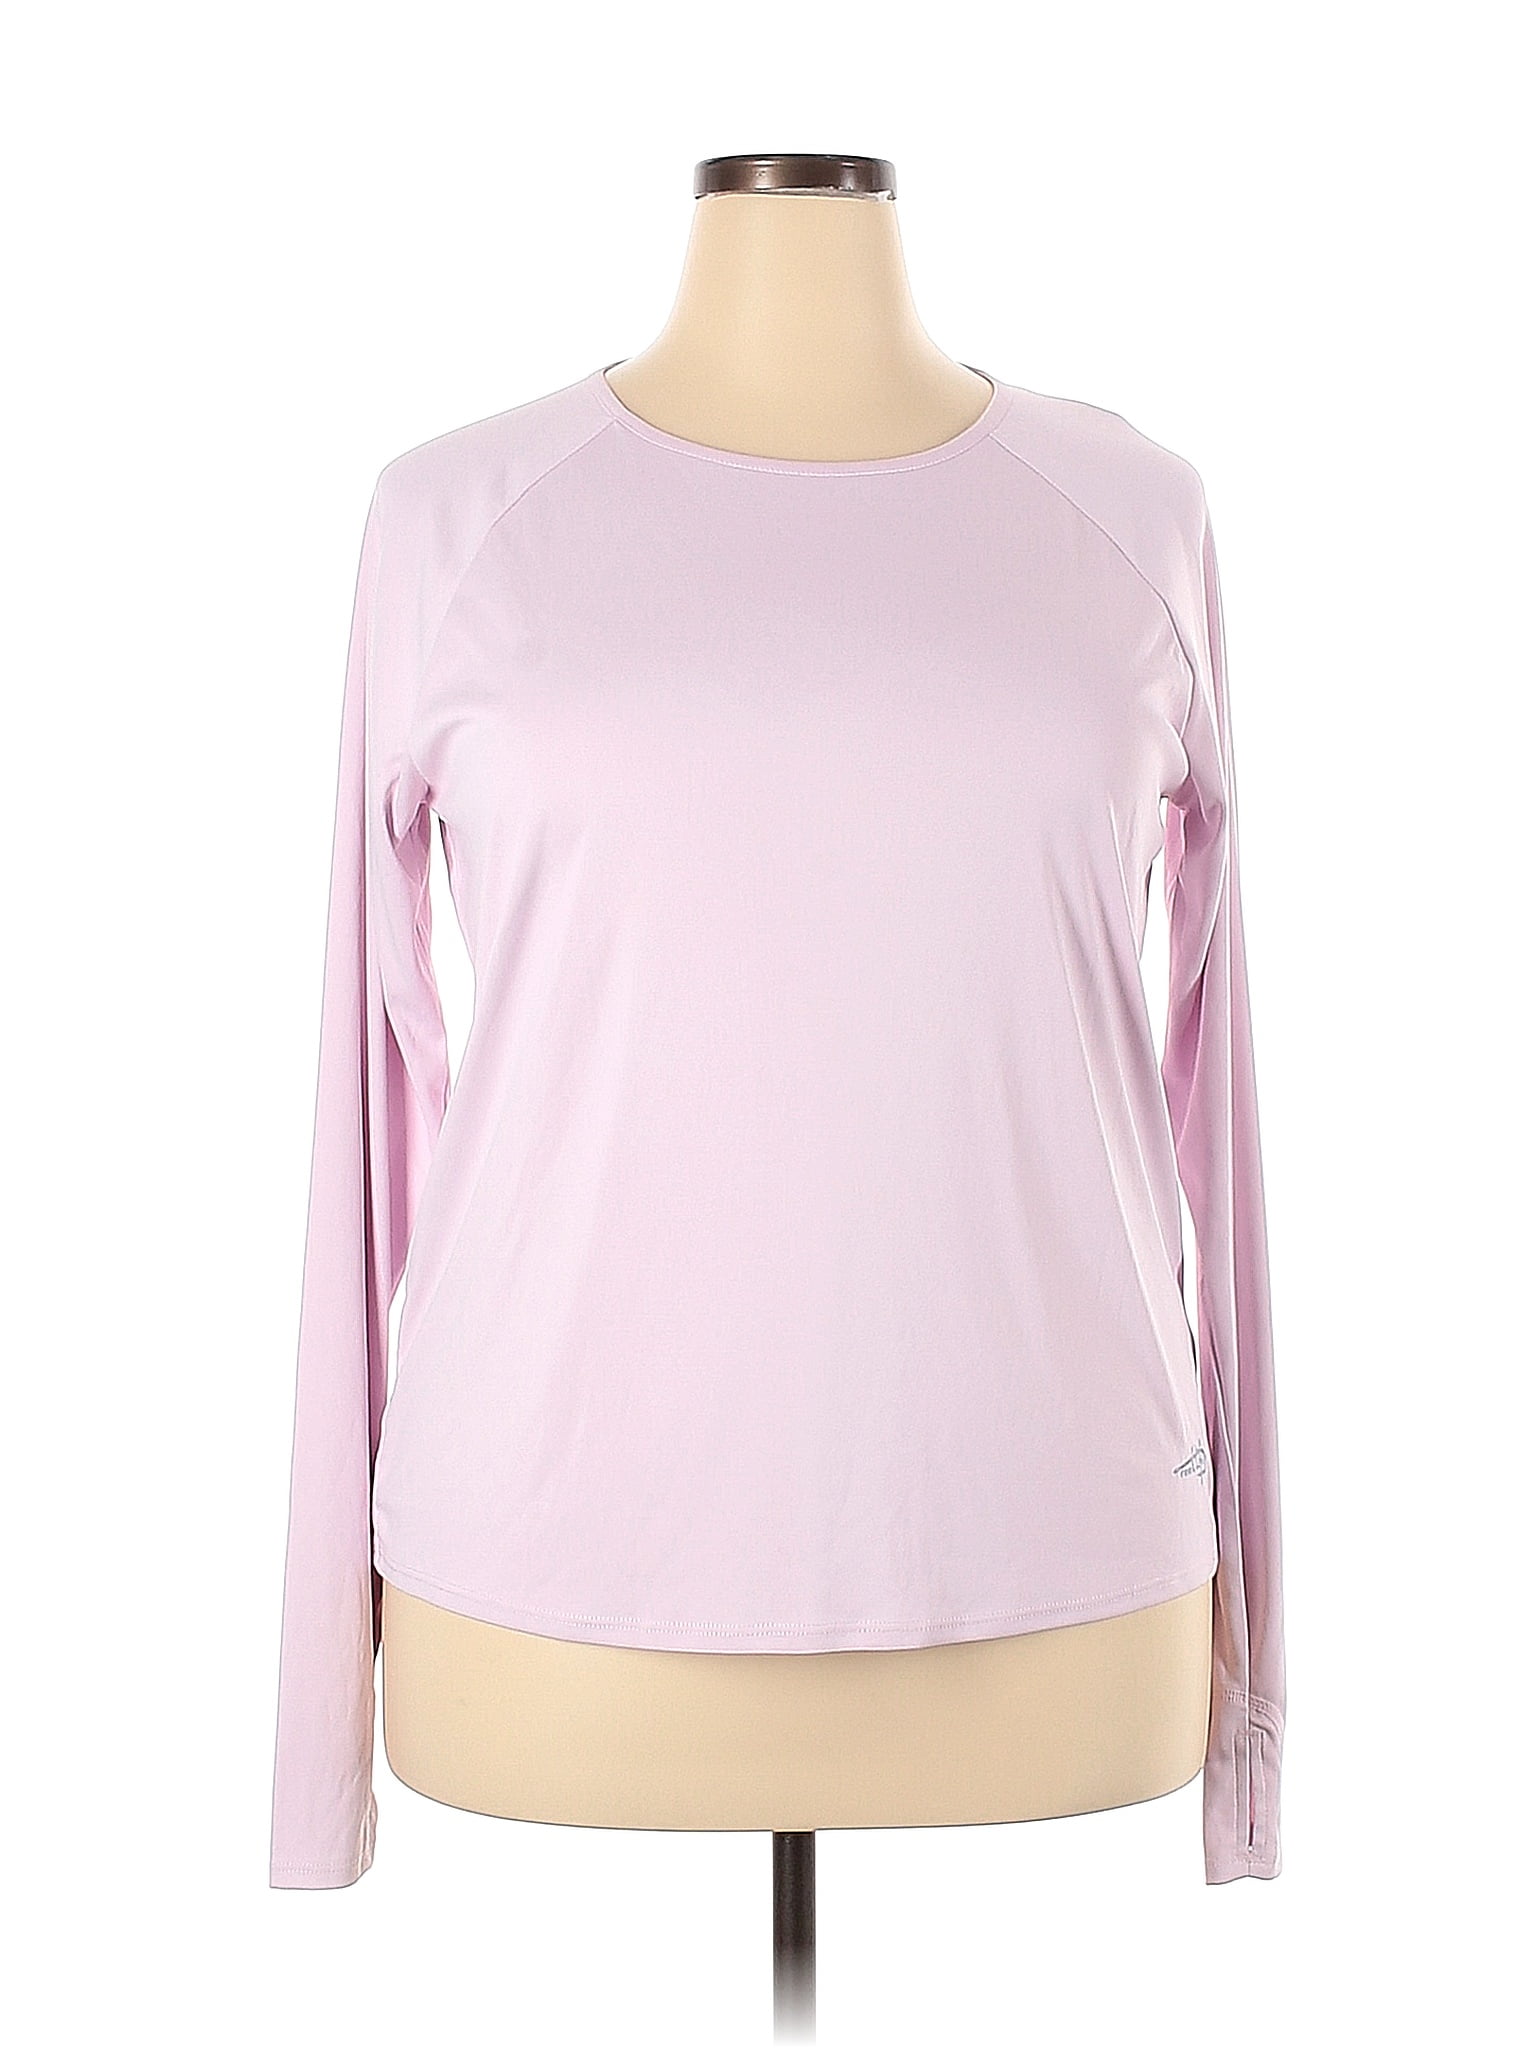 Reel Life 100% Polyester Color Block Purple Pink Long Sleeve T